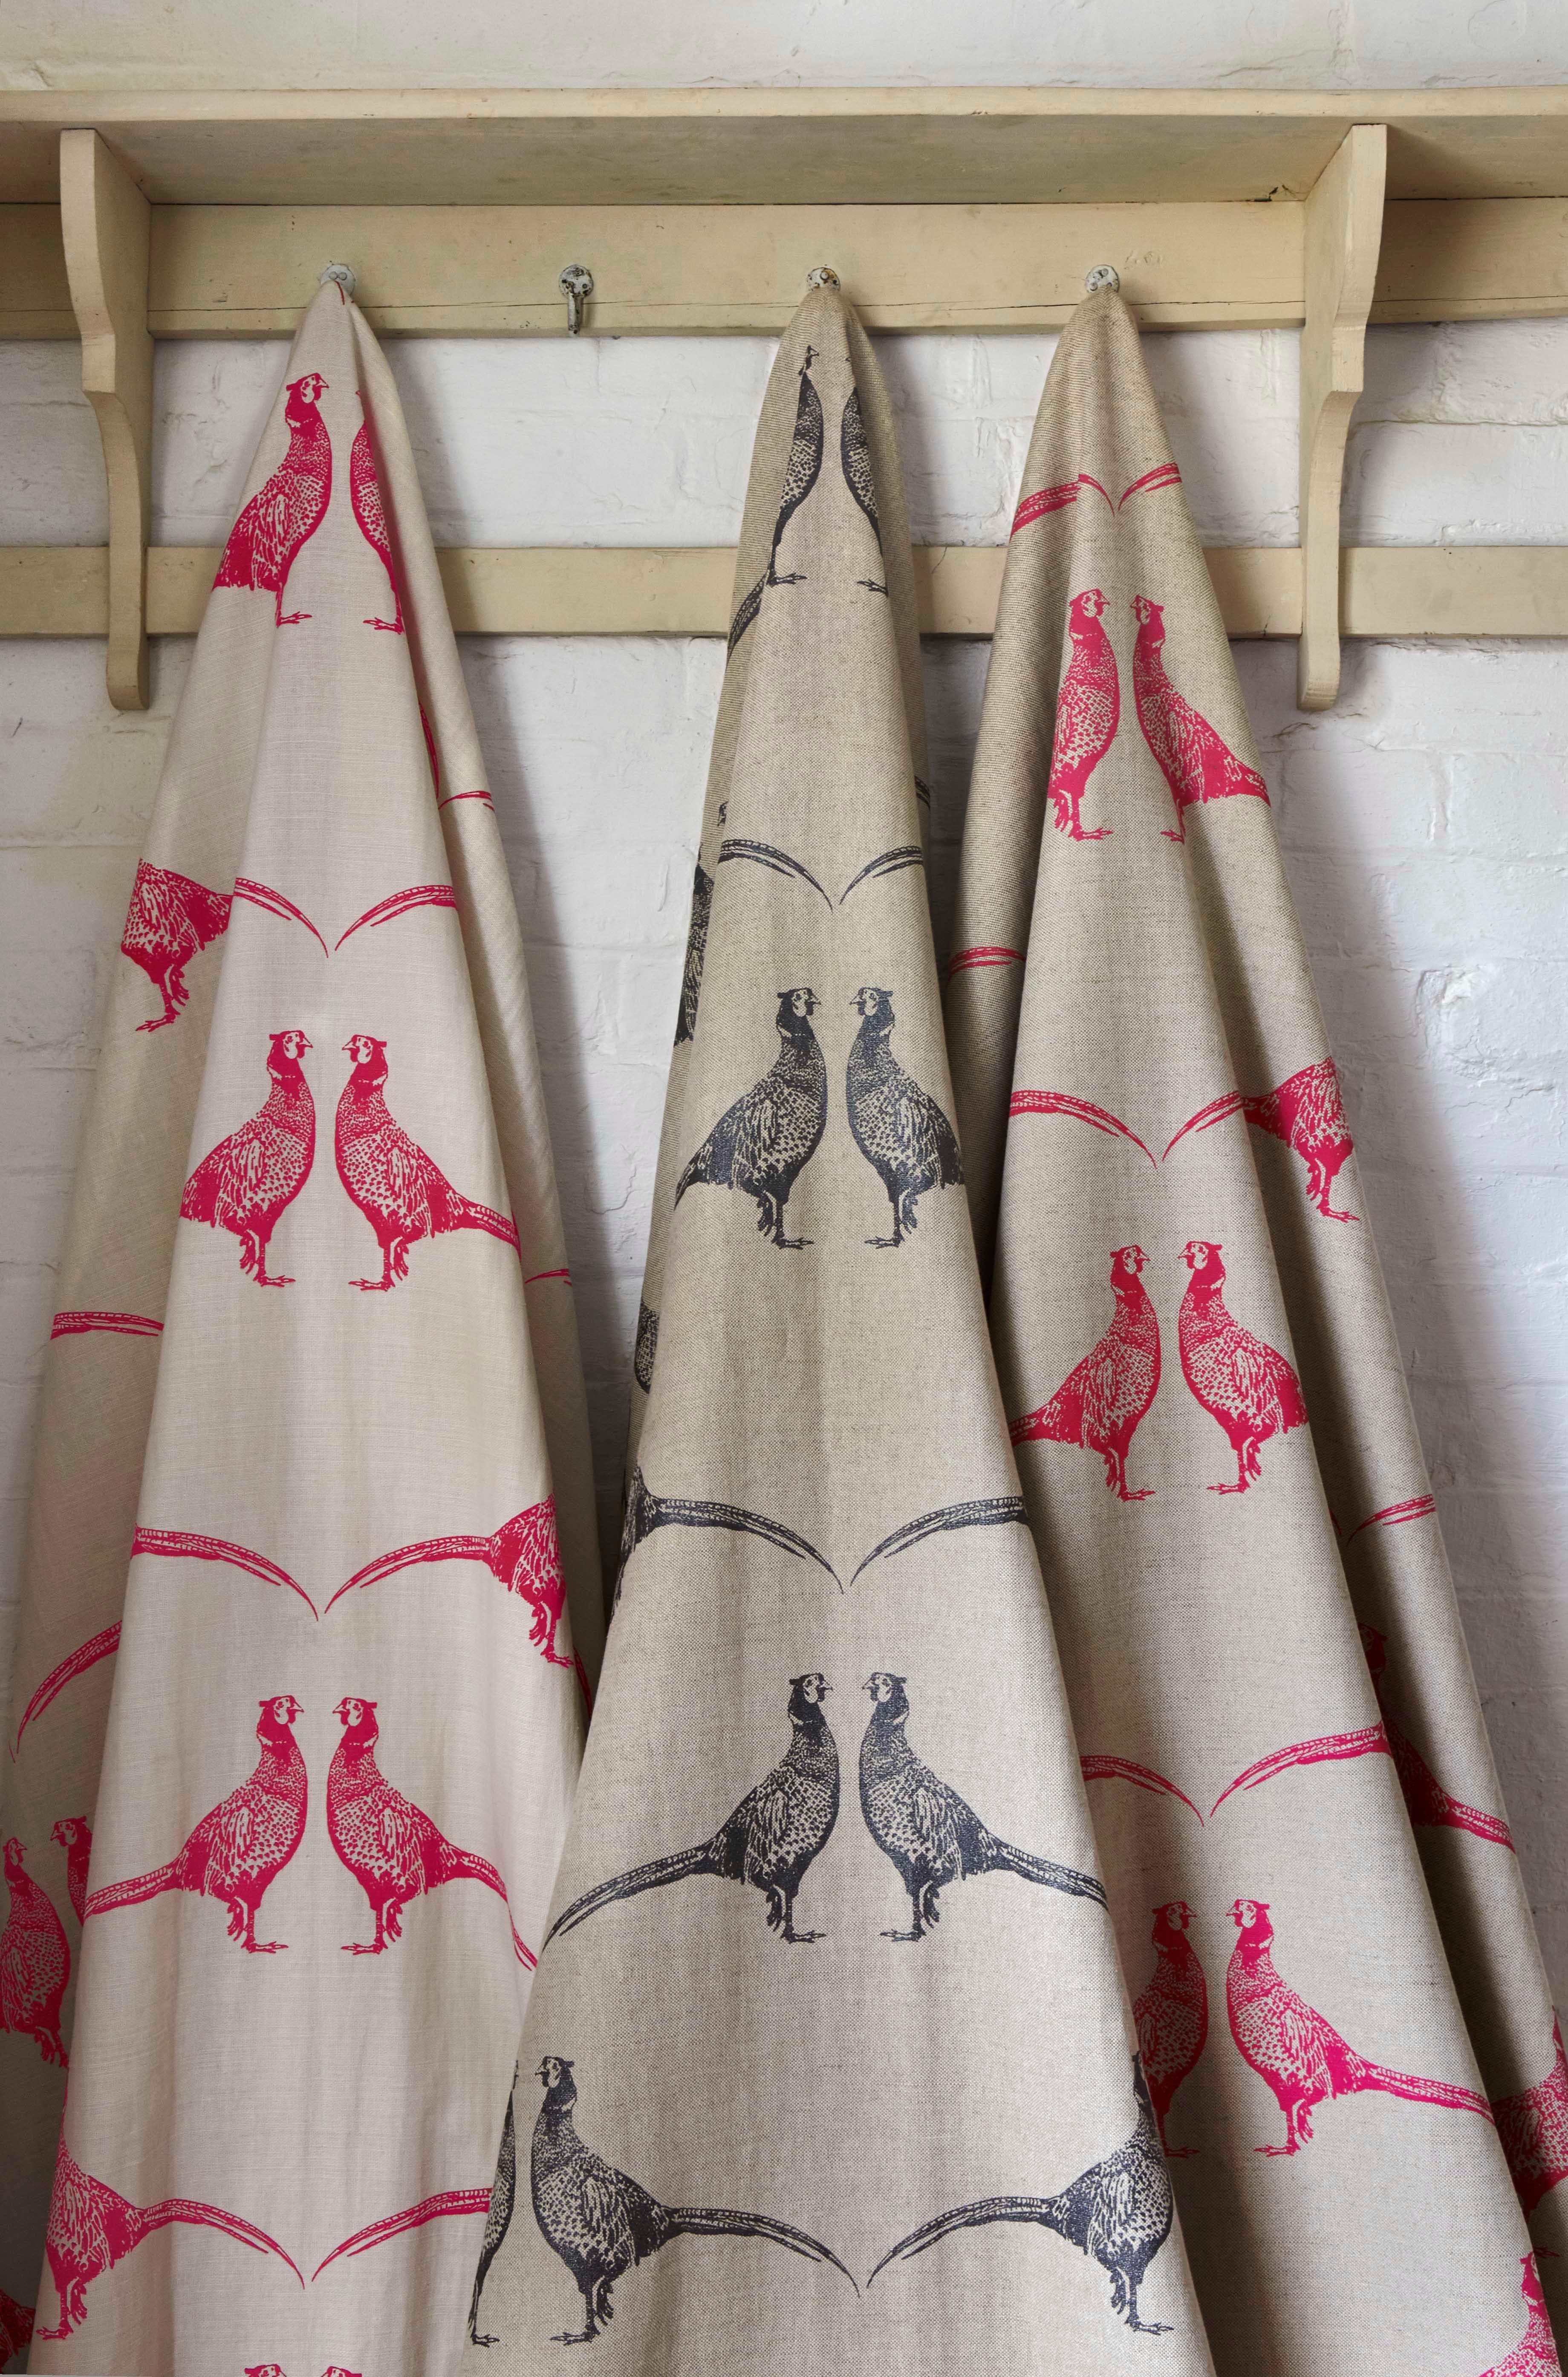 'Pheasant' Contemporary, Traditional Fabric in Pink on Natural (Britisch) im Angebot